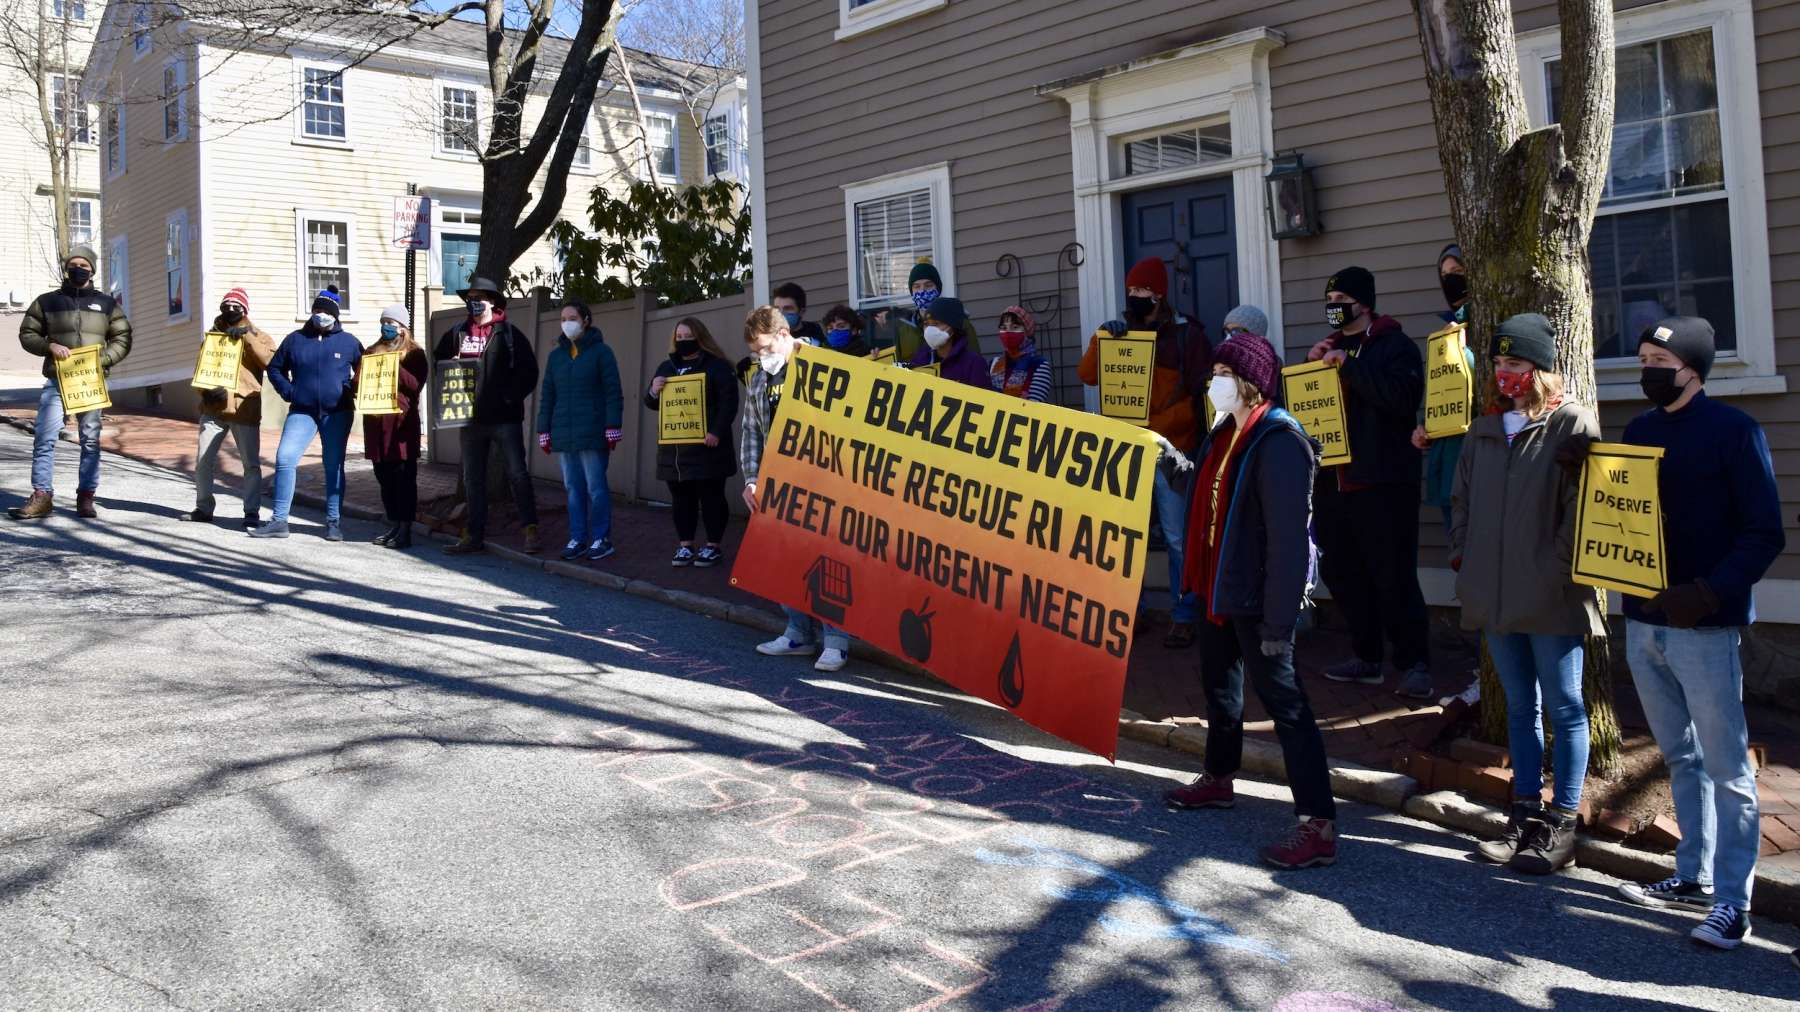 Rhode Island News: Sunrise wants Majority Leader Blazejewski to actually support the Green New Deal